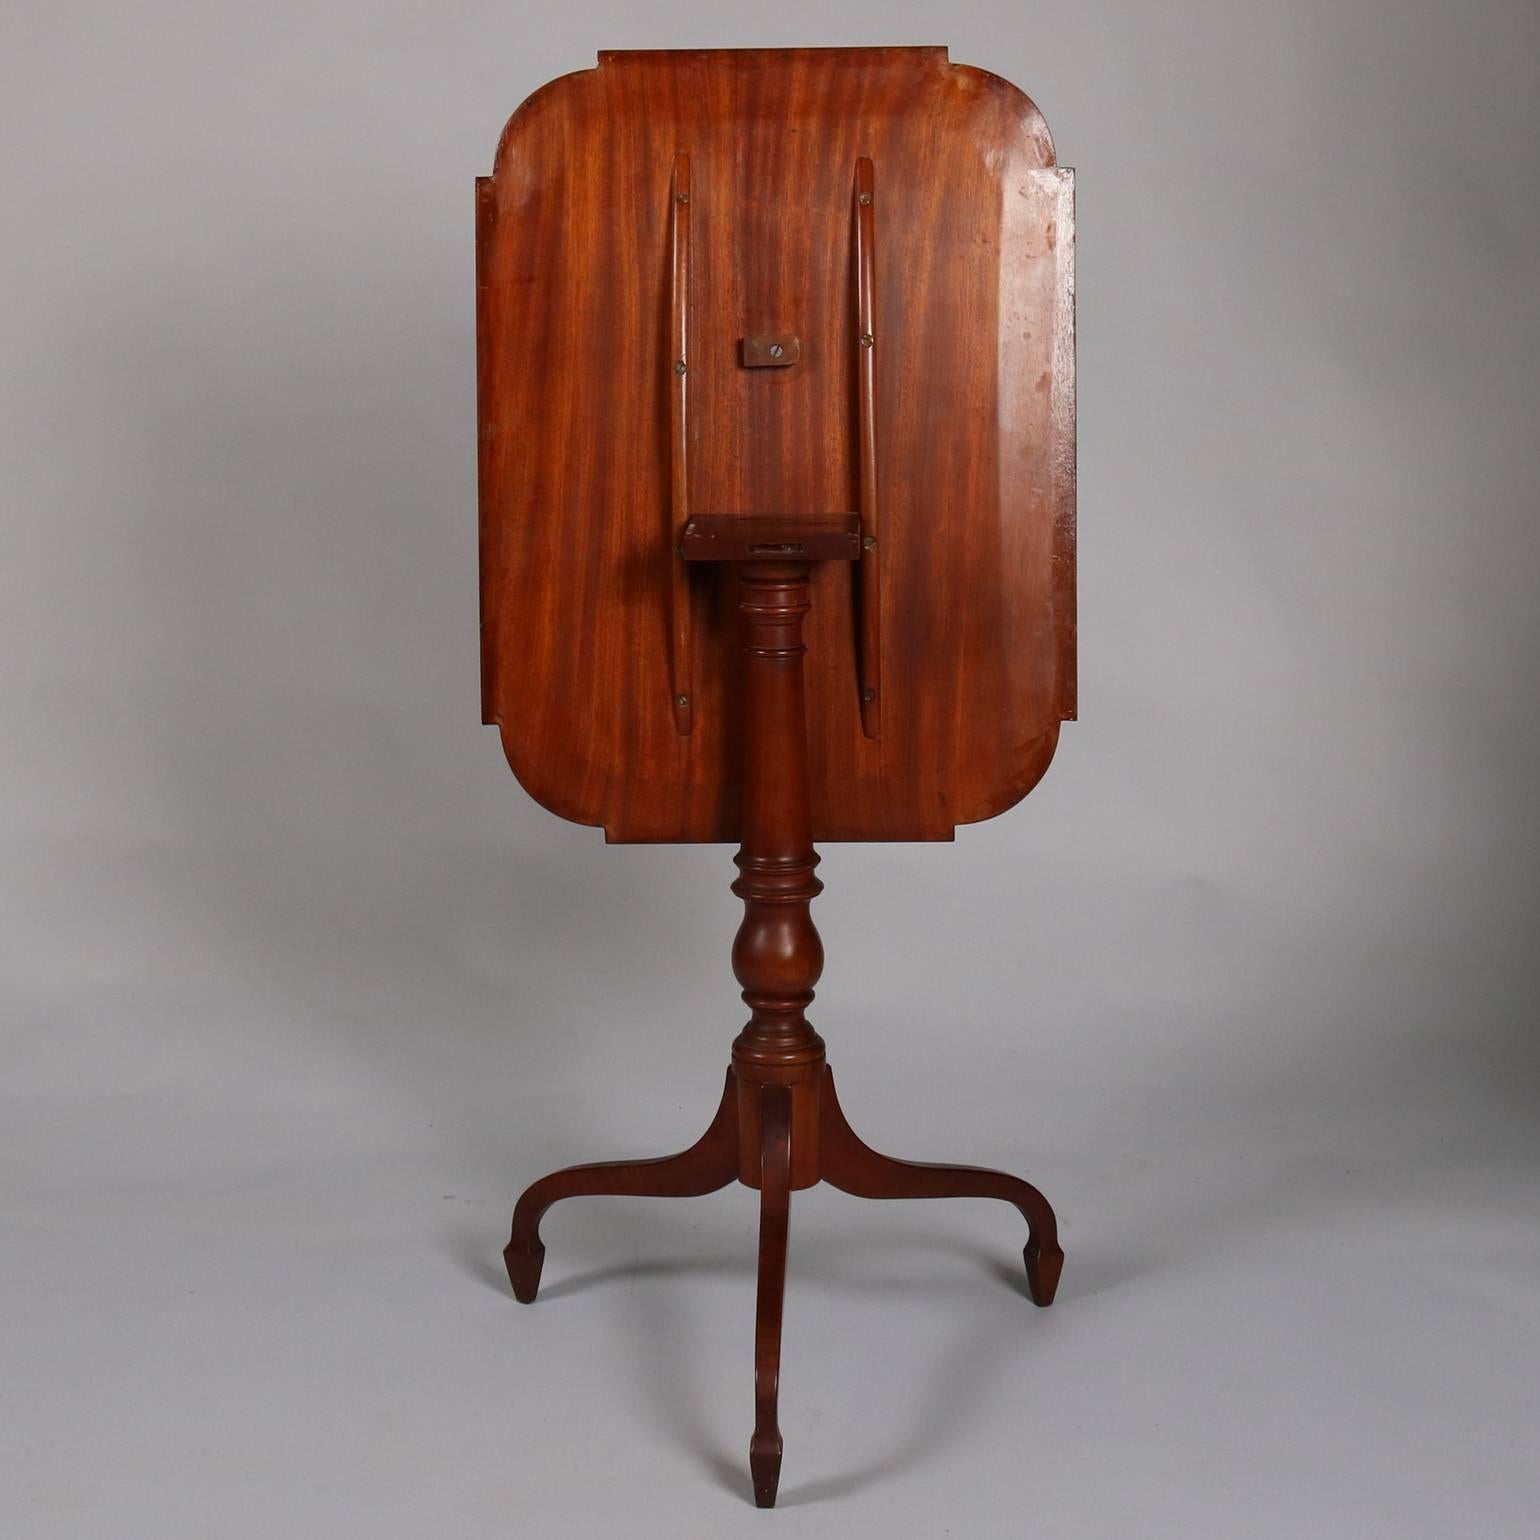 American Antique Federal Style Mahogany Tilt-Top Candle/Lamp Stand, 19th Century